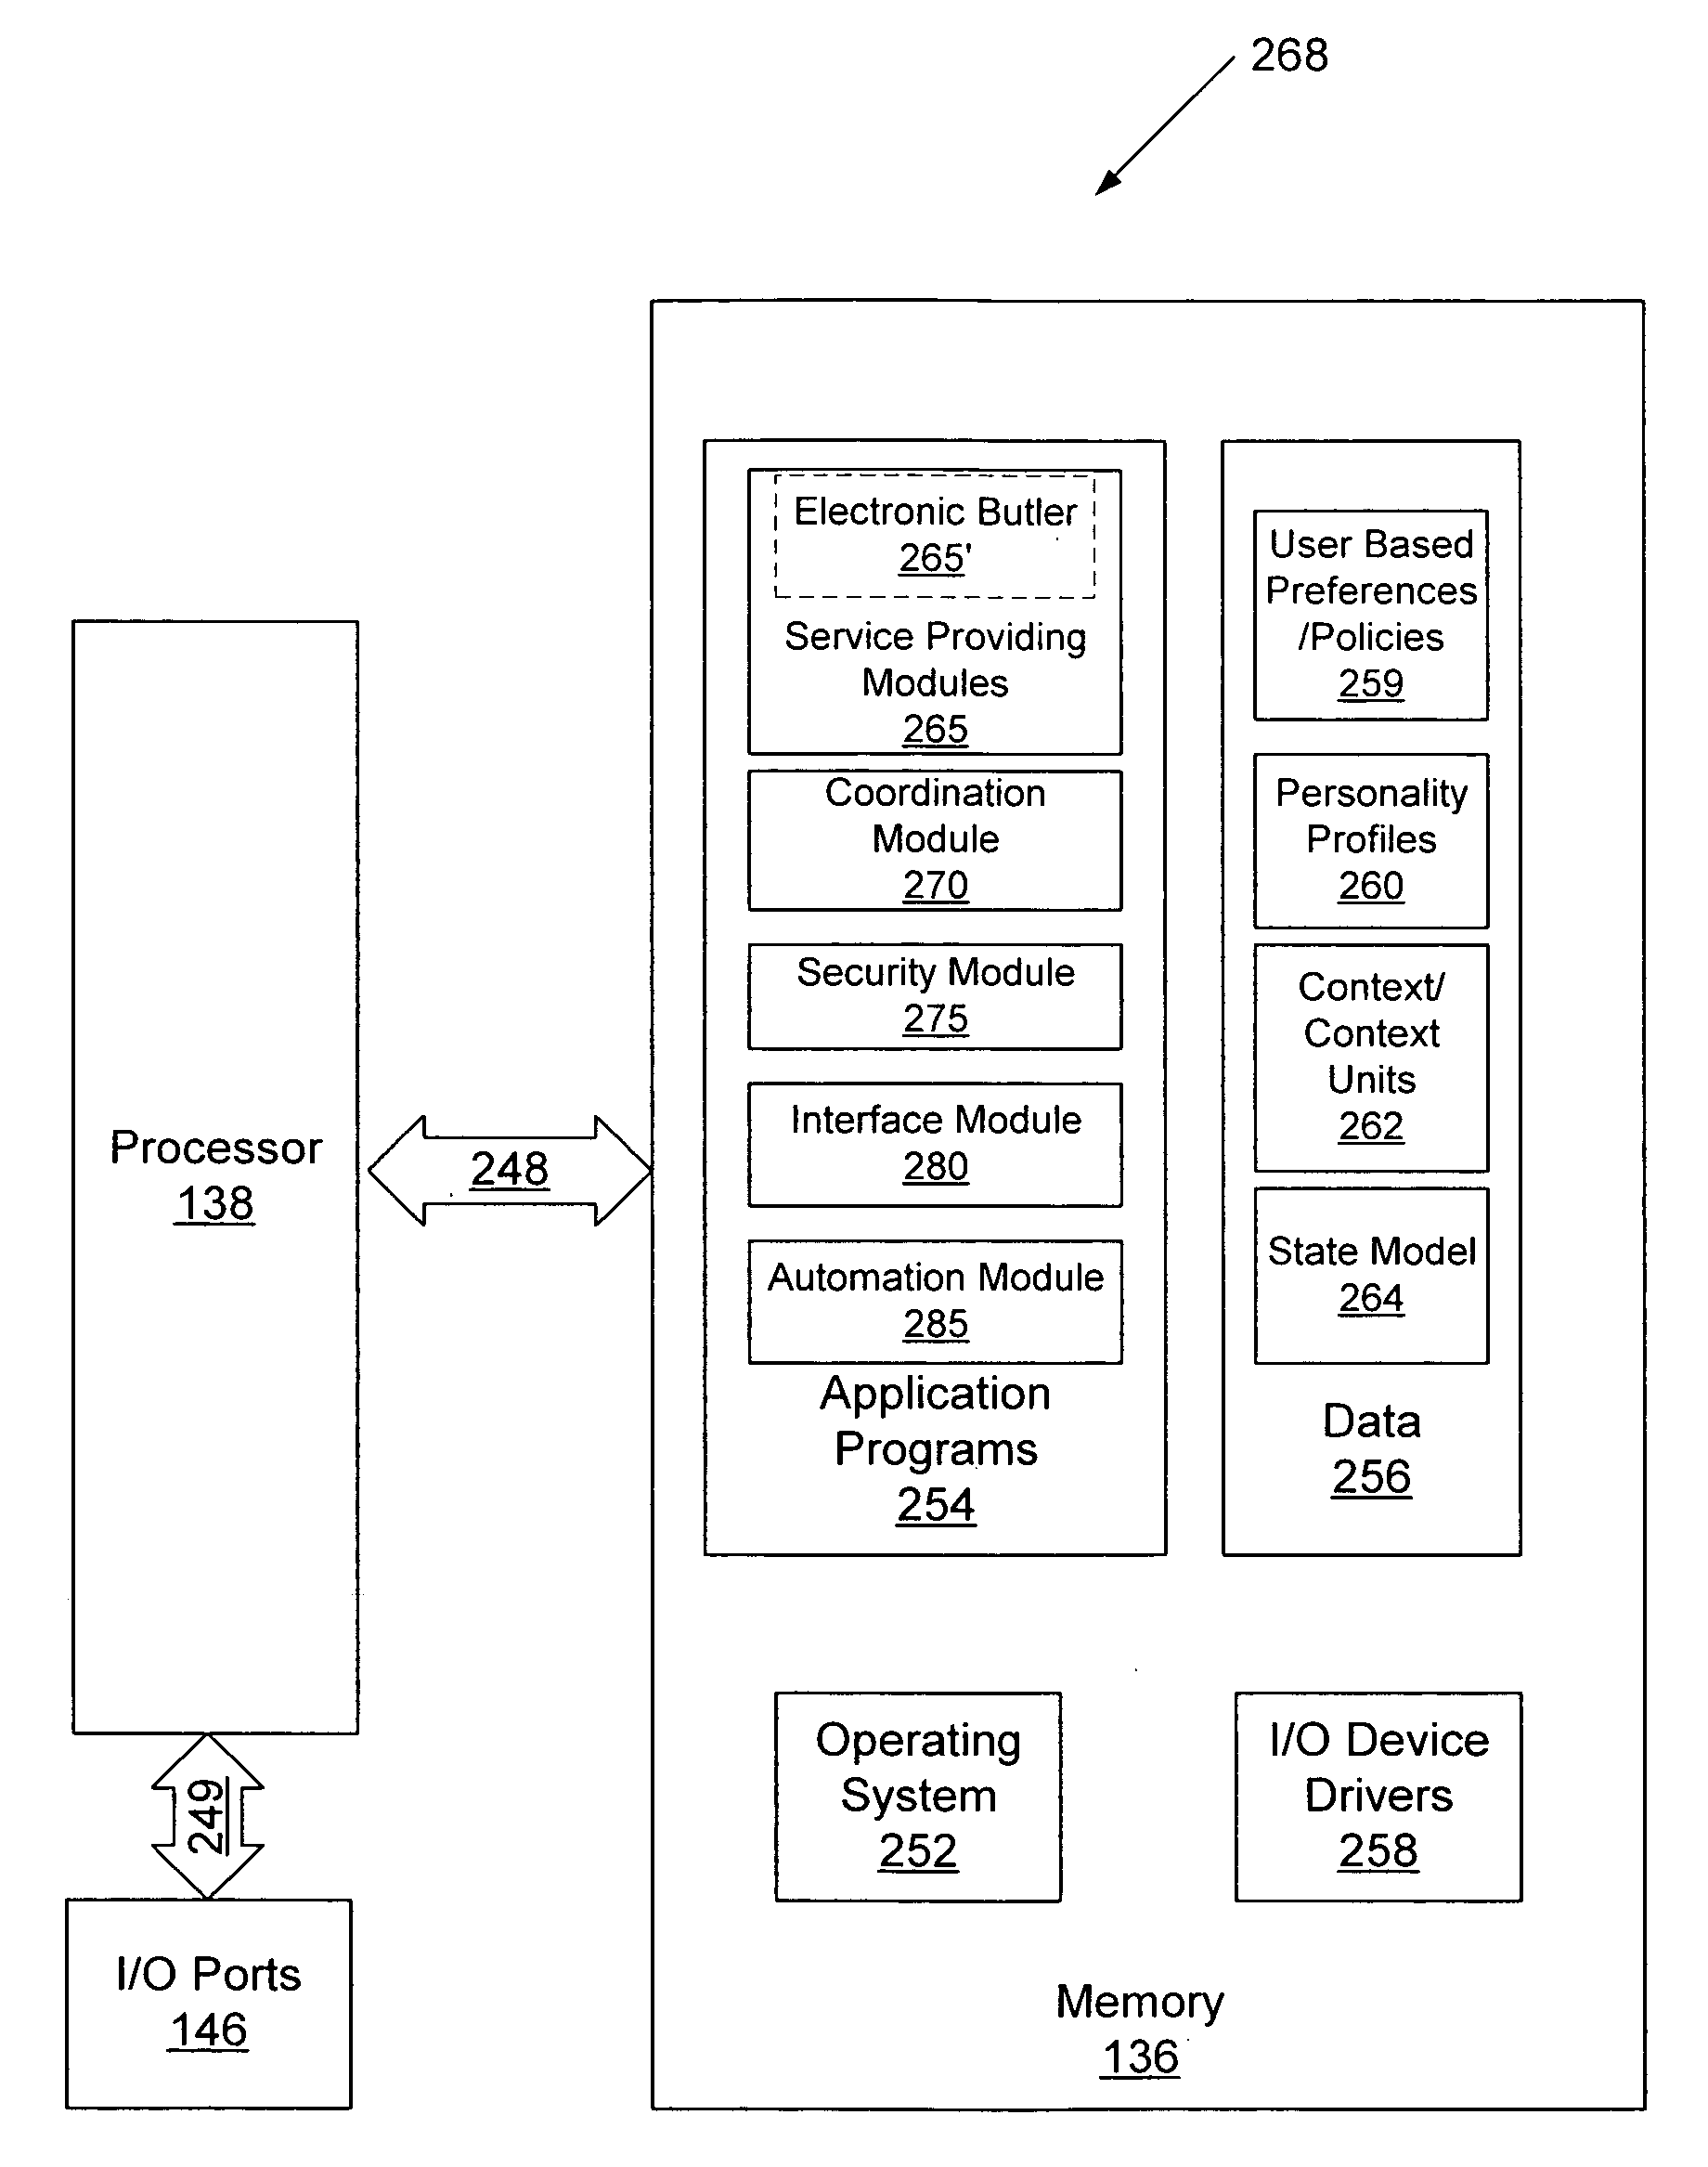 Electronic butler for providing application services to a user